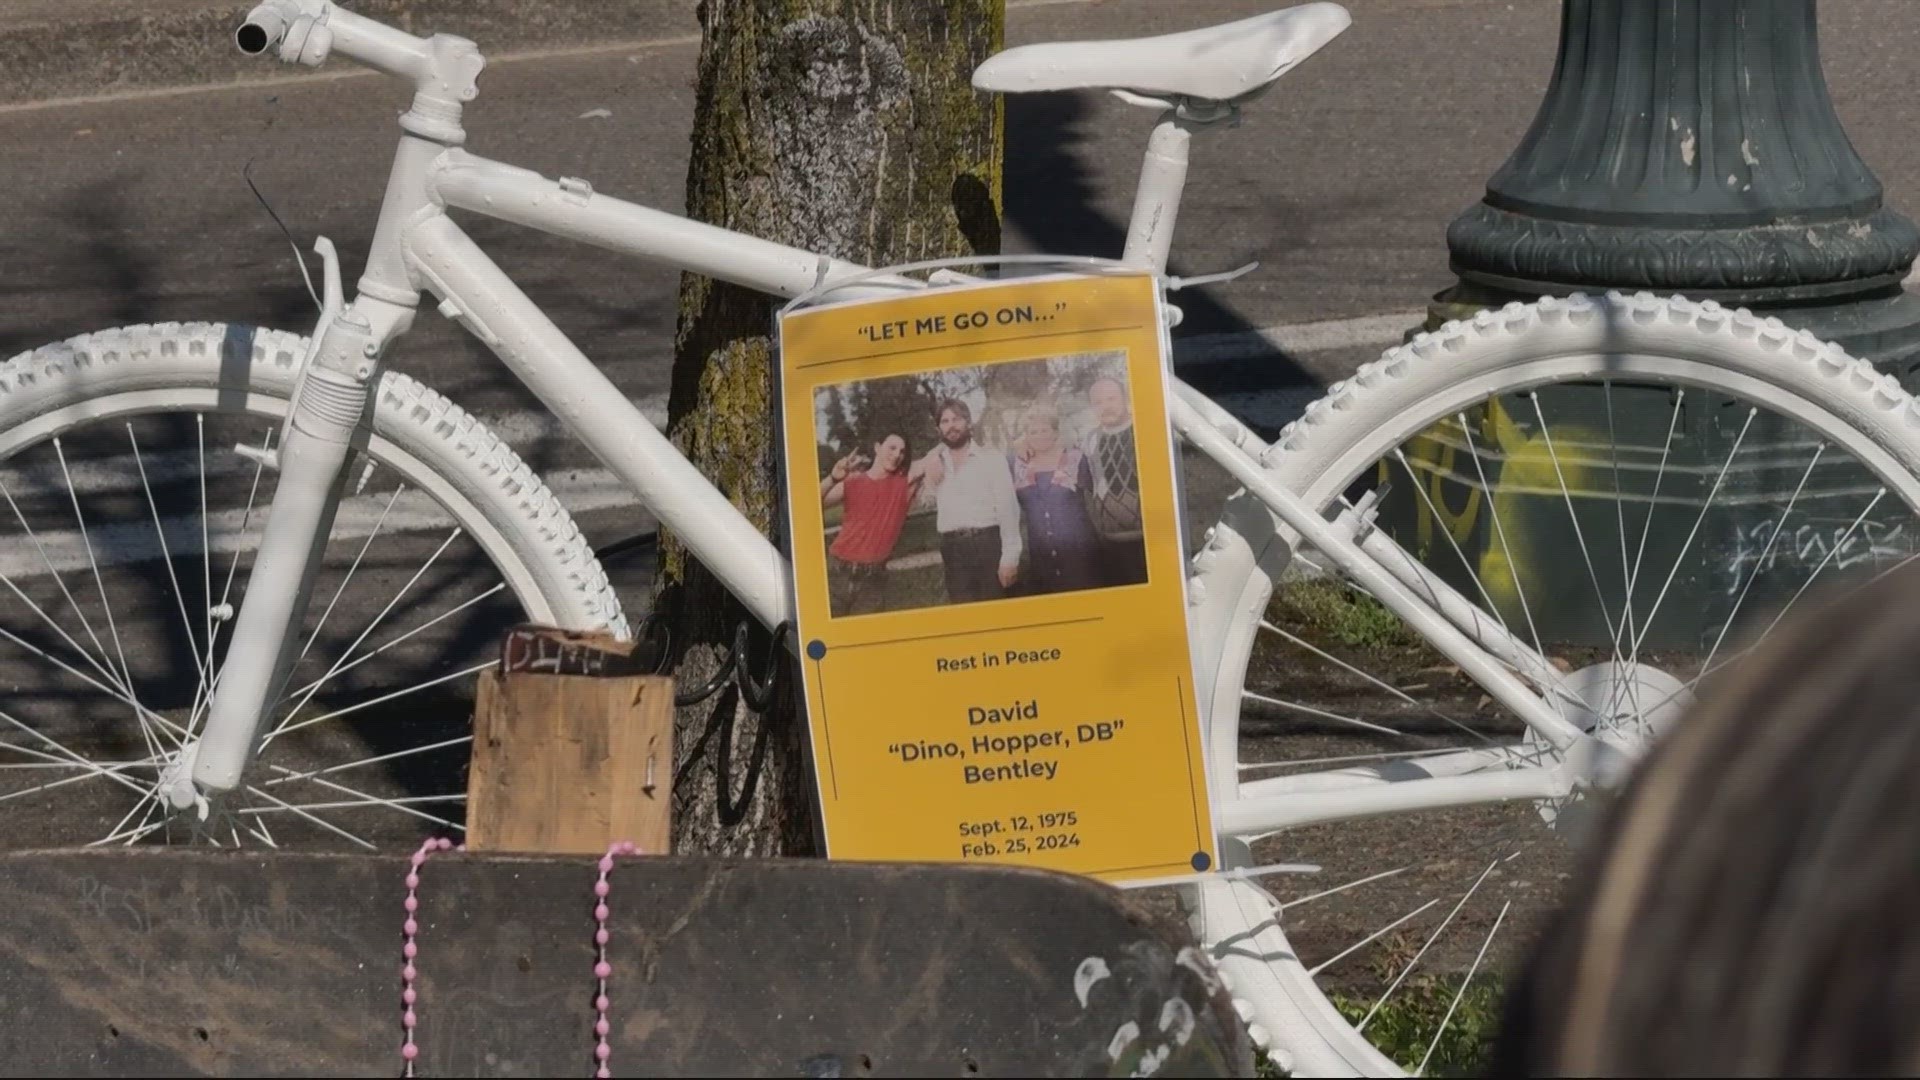 The ride was held Saturday afternoon in honor of 48-year-old David Bentley who was killed last month in Southeast Portland.